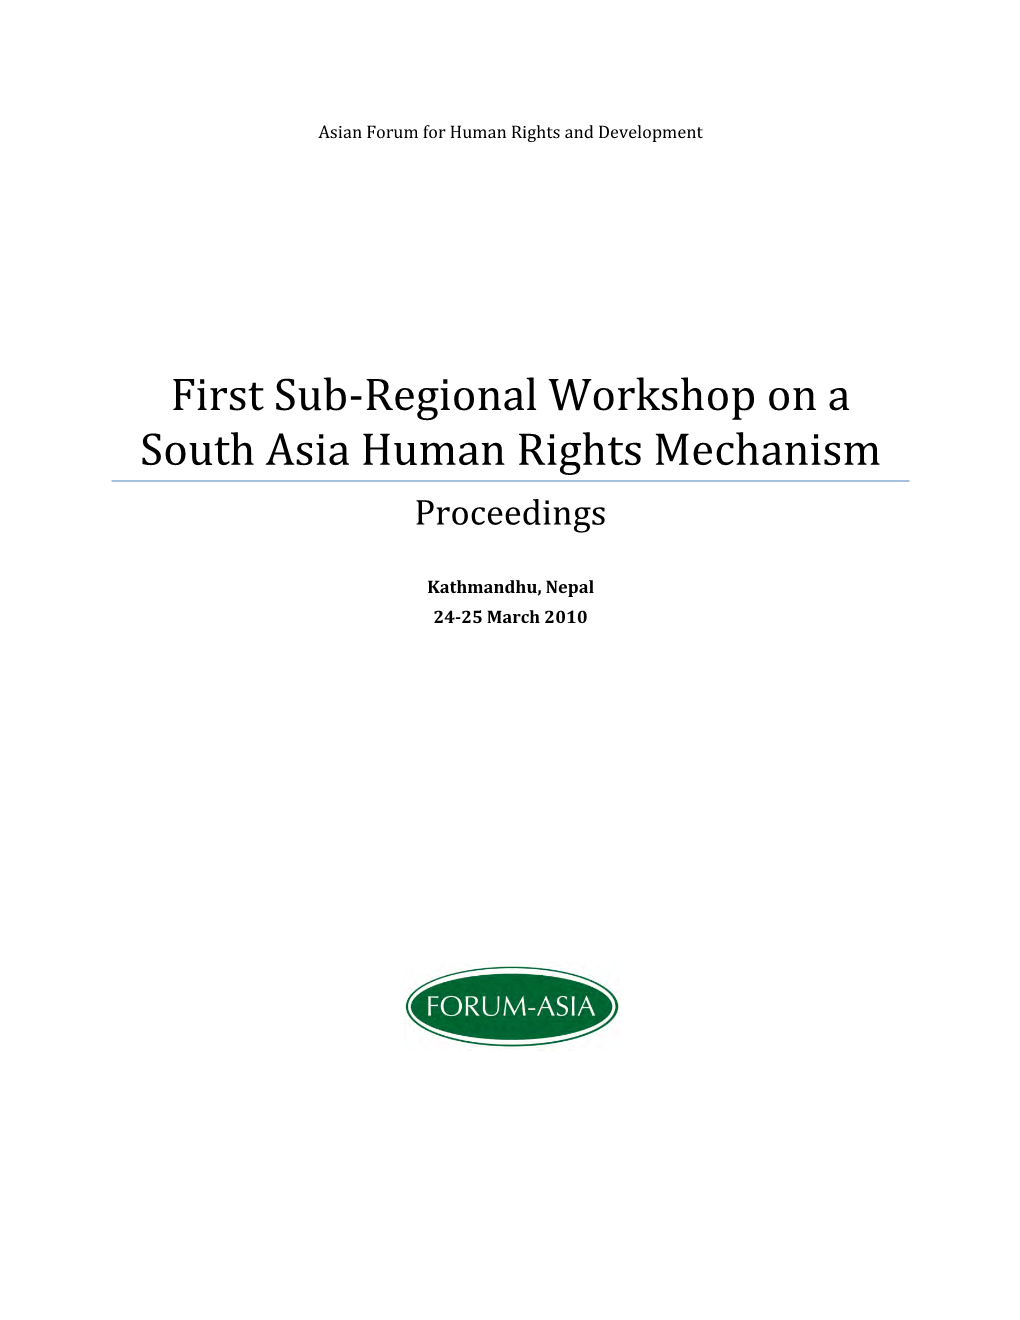 First Sub-Regional Workshop on a South Asia Human Rights Mechanism Proceedings